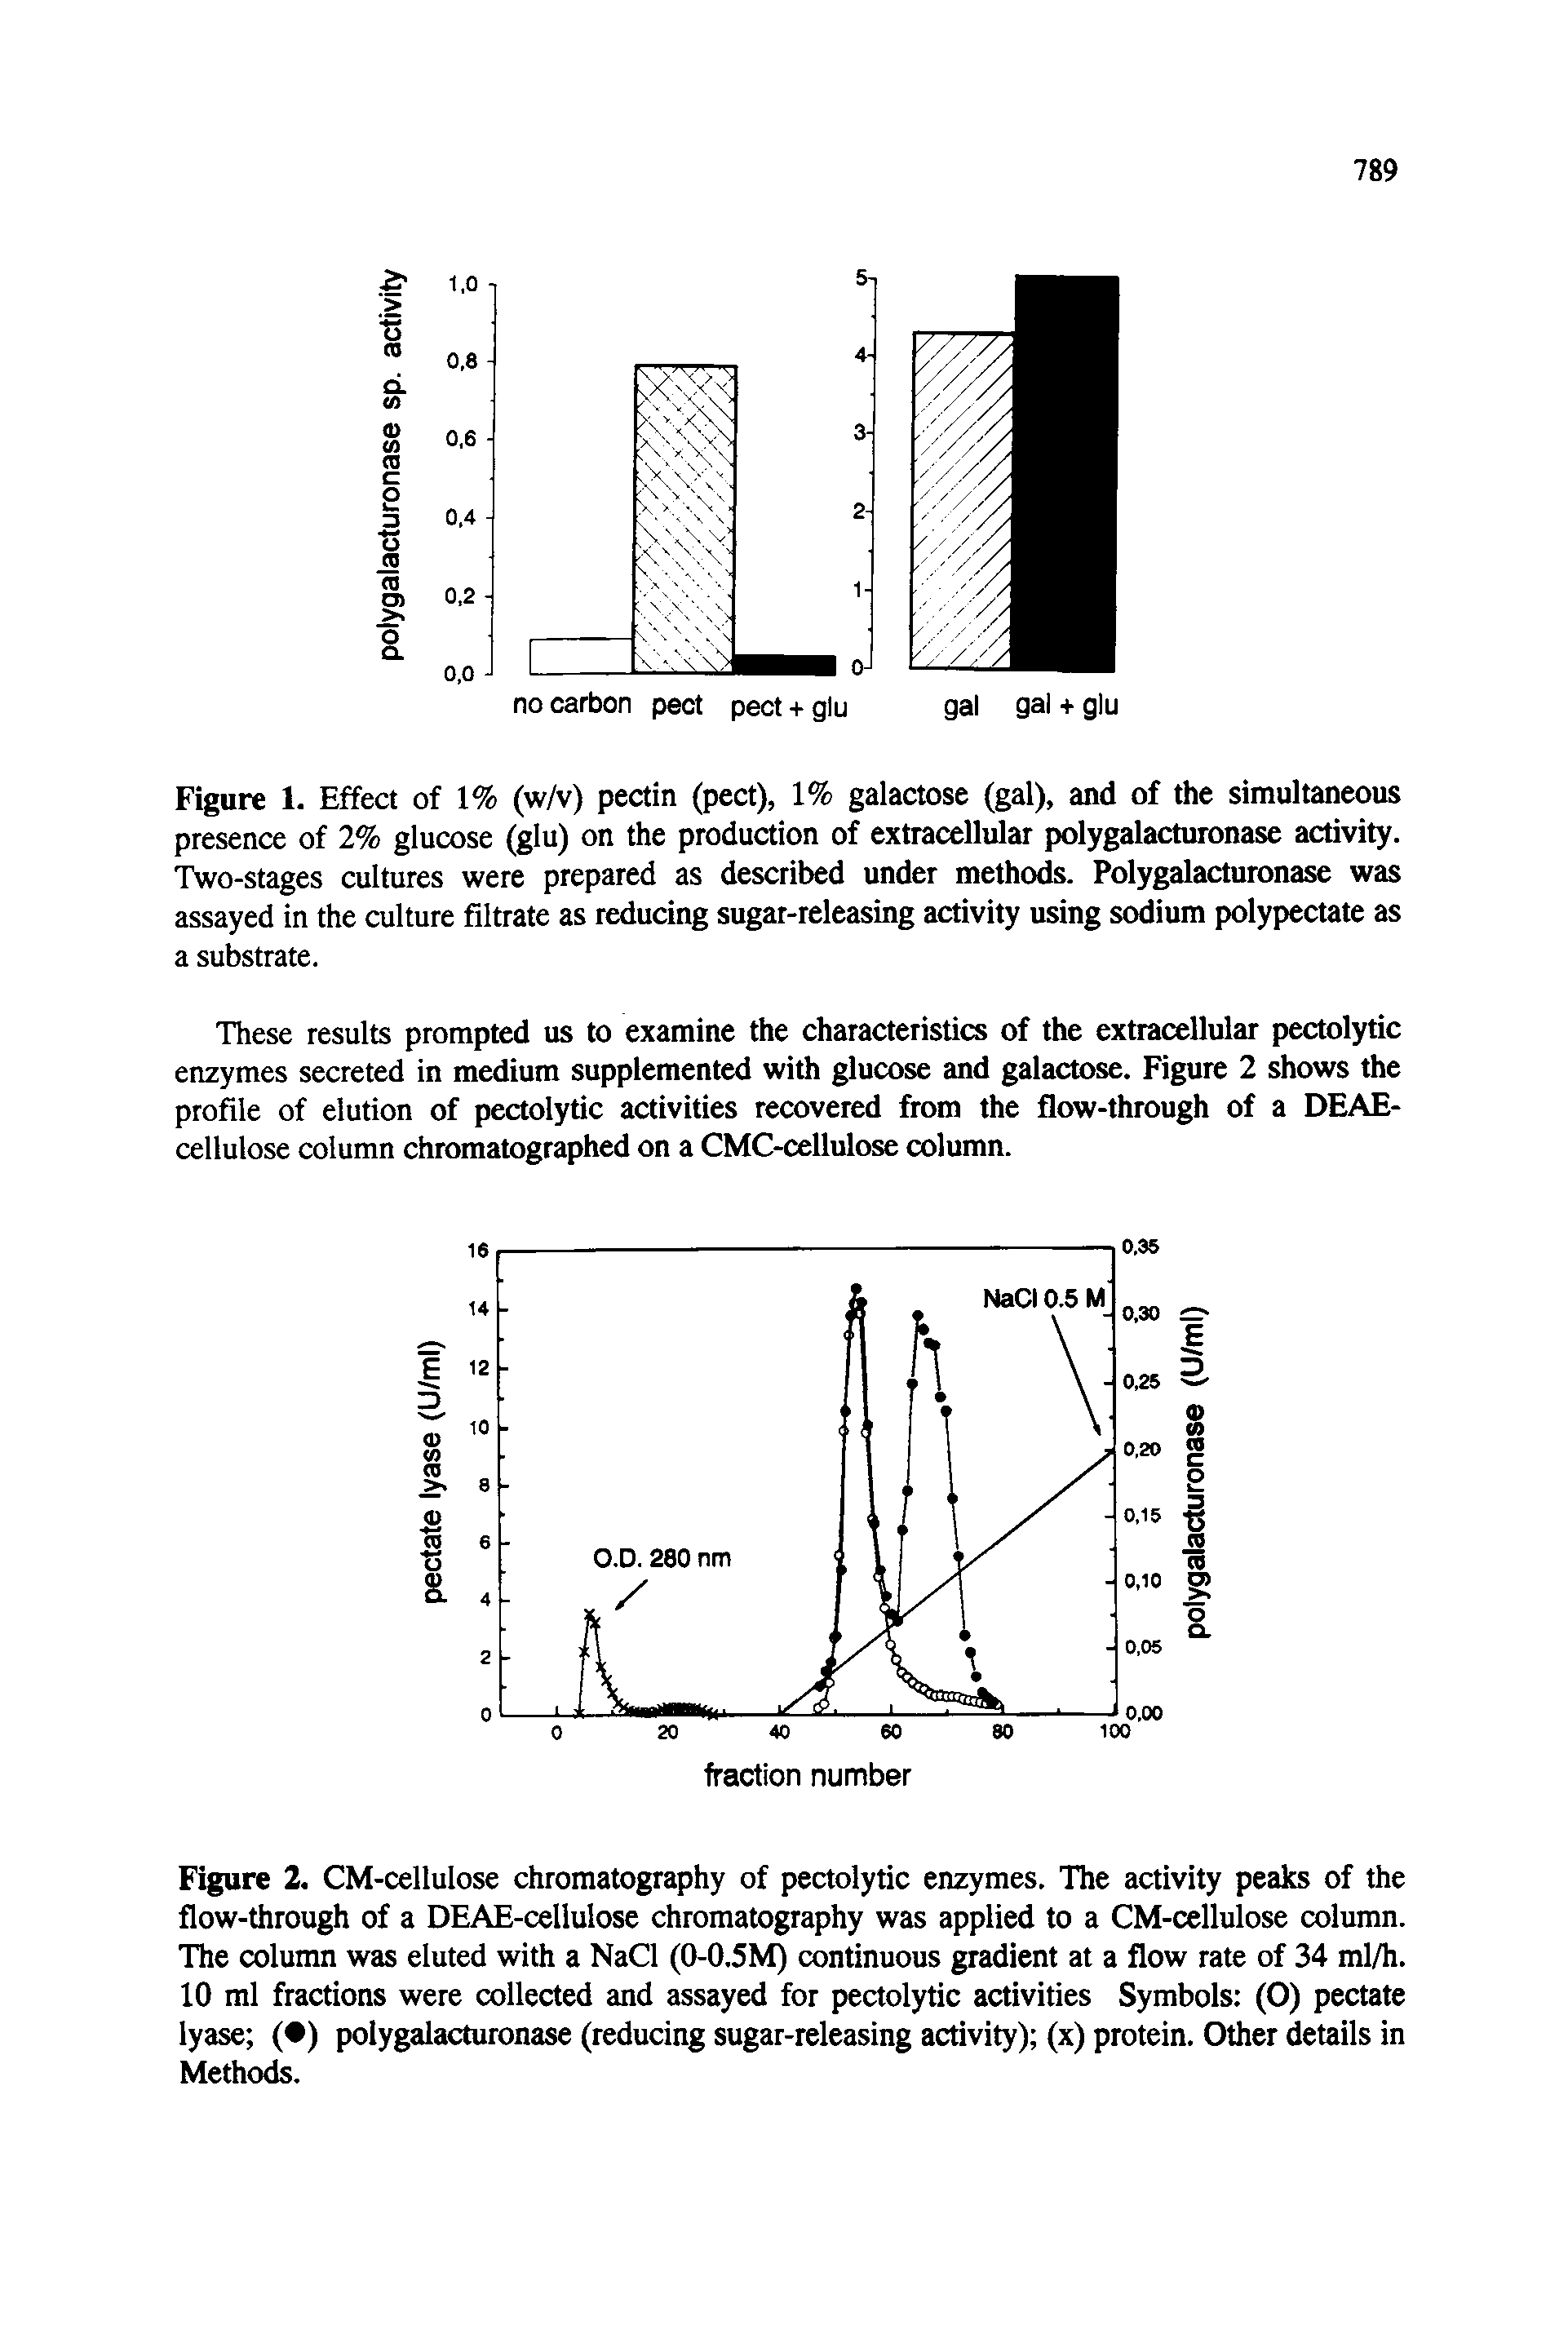 Figure 2. CM-cellulose chromatography of pectolytic enzymes. The activity peaks of the flow-through of a DEAE-cellulose chromatography was applied to a CM-cellulose column. The column was eluted with a NaCl (0-0.5M) continuous gradient at a flow rate of 34 ml/h. 10 ml fractions were collected and assayed for pectolytic activities Symbols (0) pectate lyase ( ) polygalacturonase (reducing sugar-releasing activity) (x) protein. Other details in Methods.